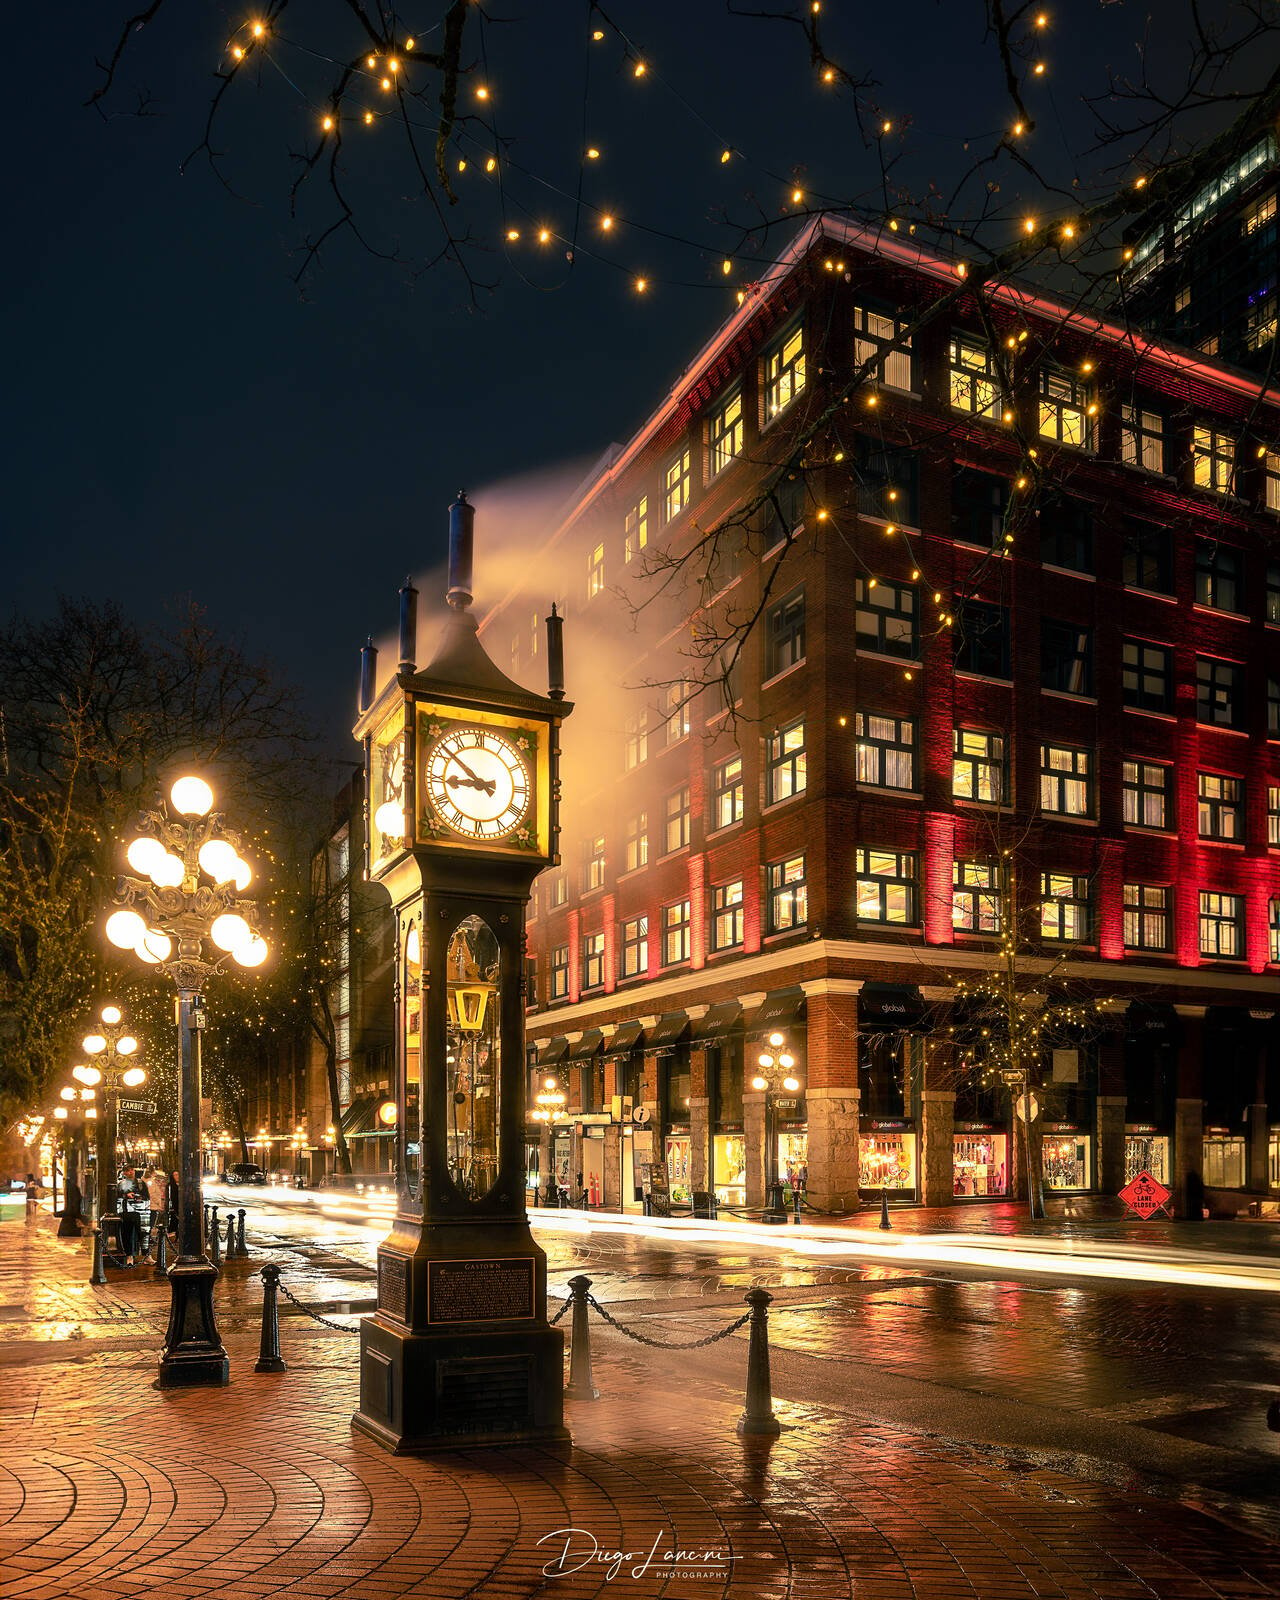 Image of Gastown Steam Clock by Diego Lancini